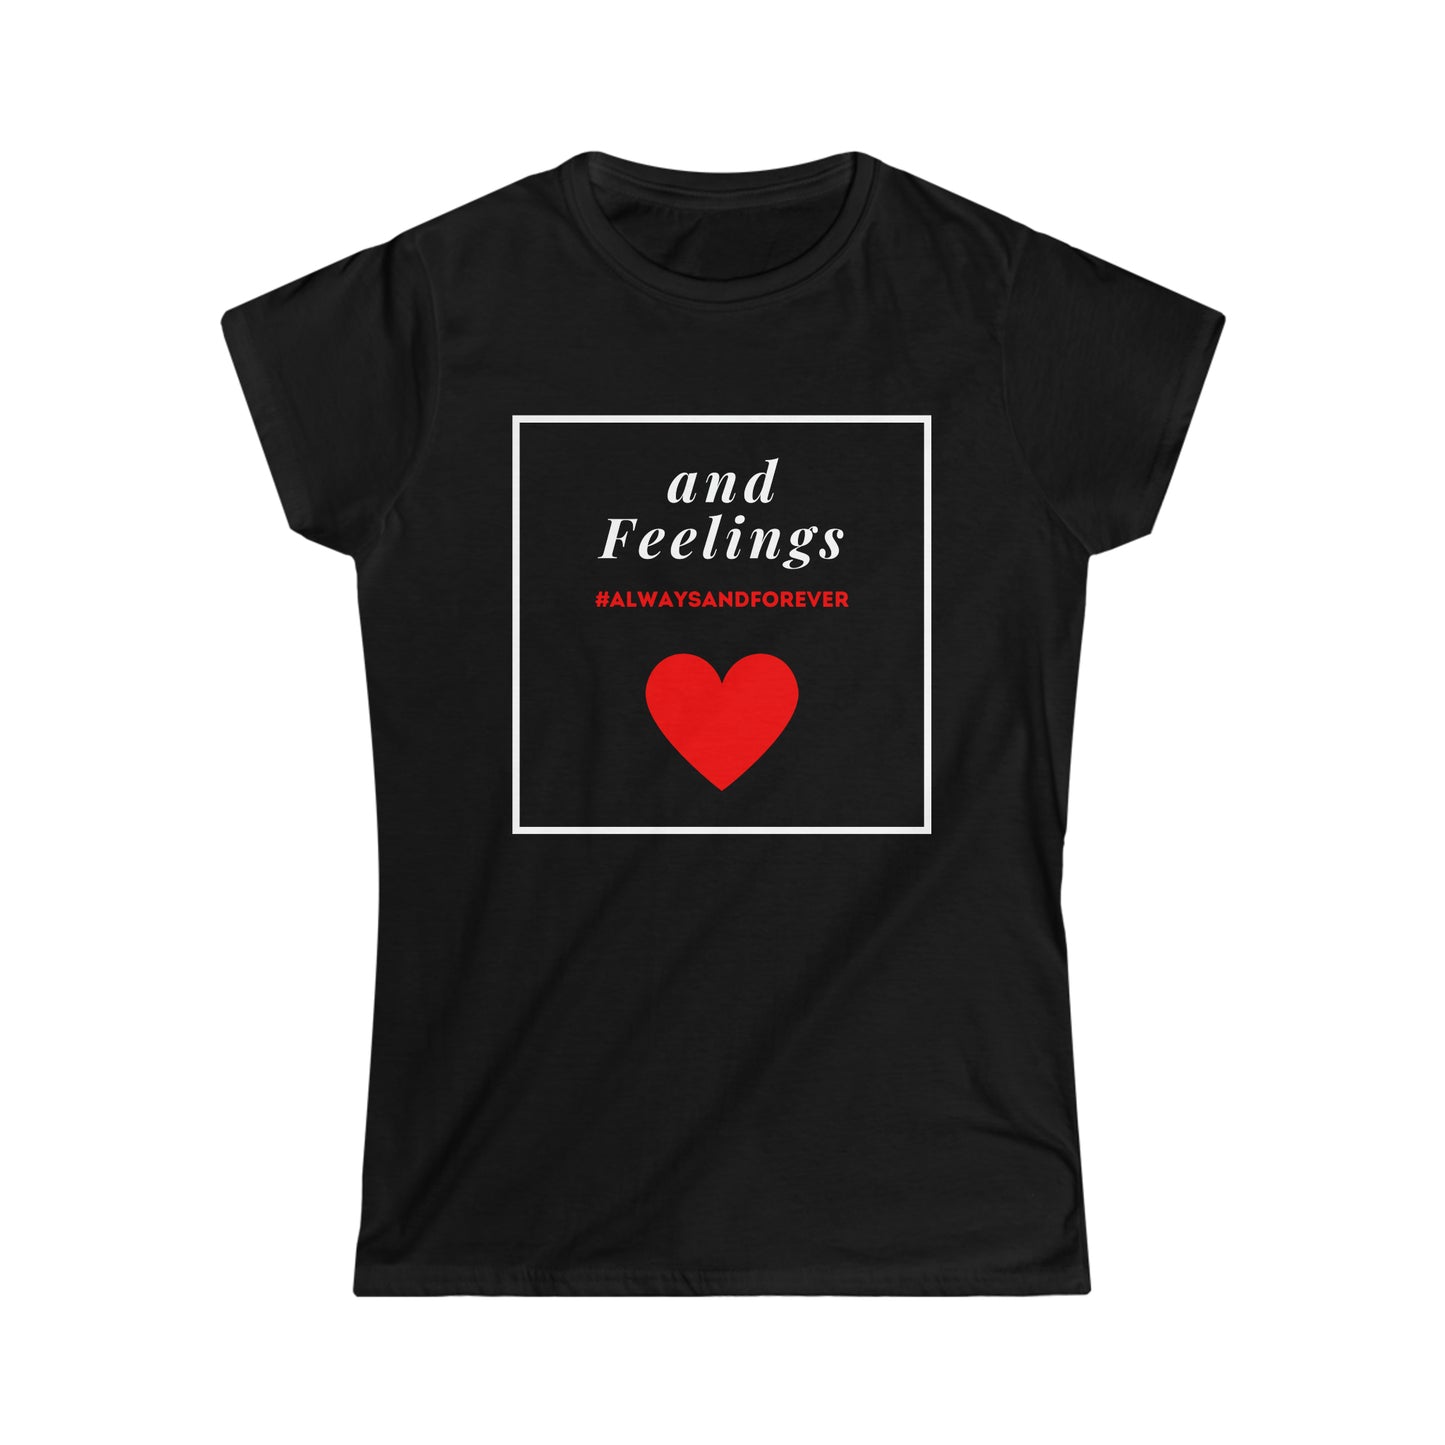 Catching Flights and Feelings - Couples T-shirt Set - Ladies